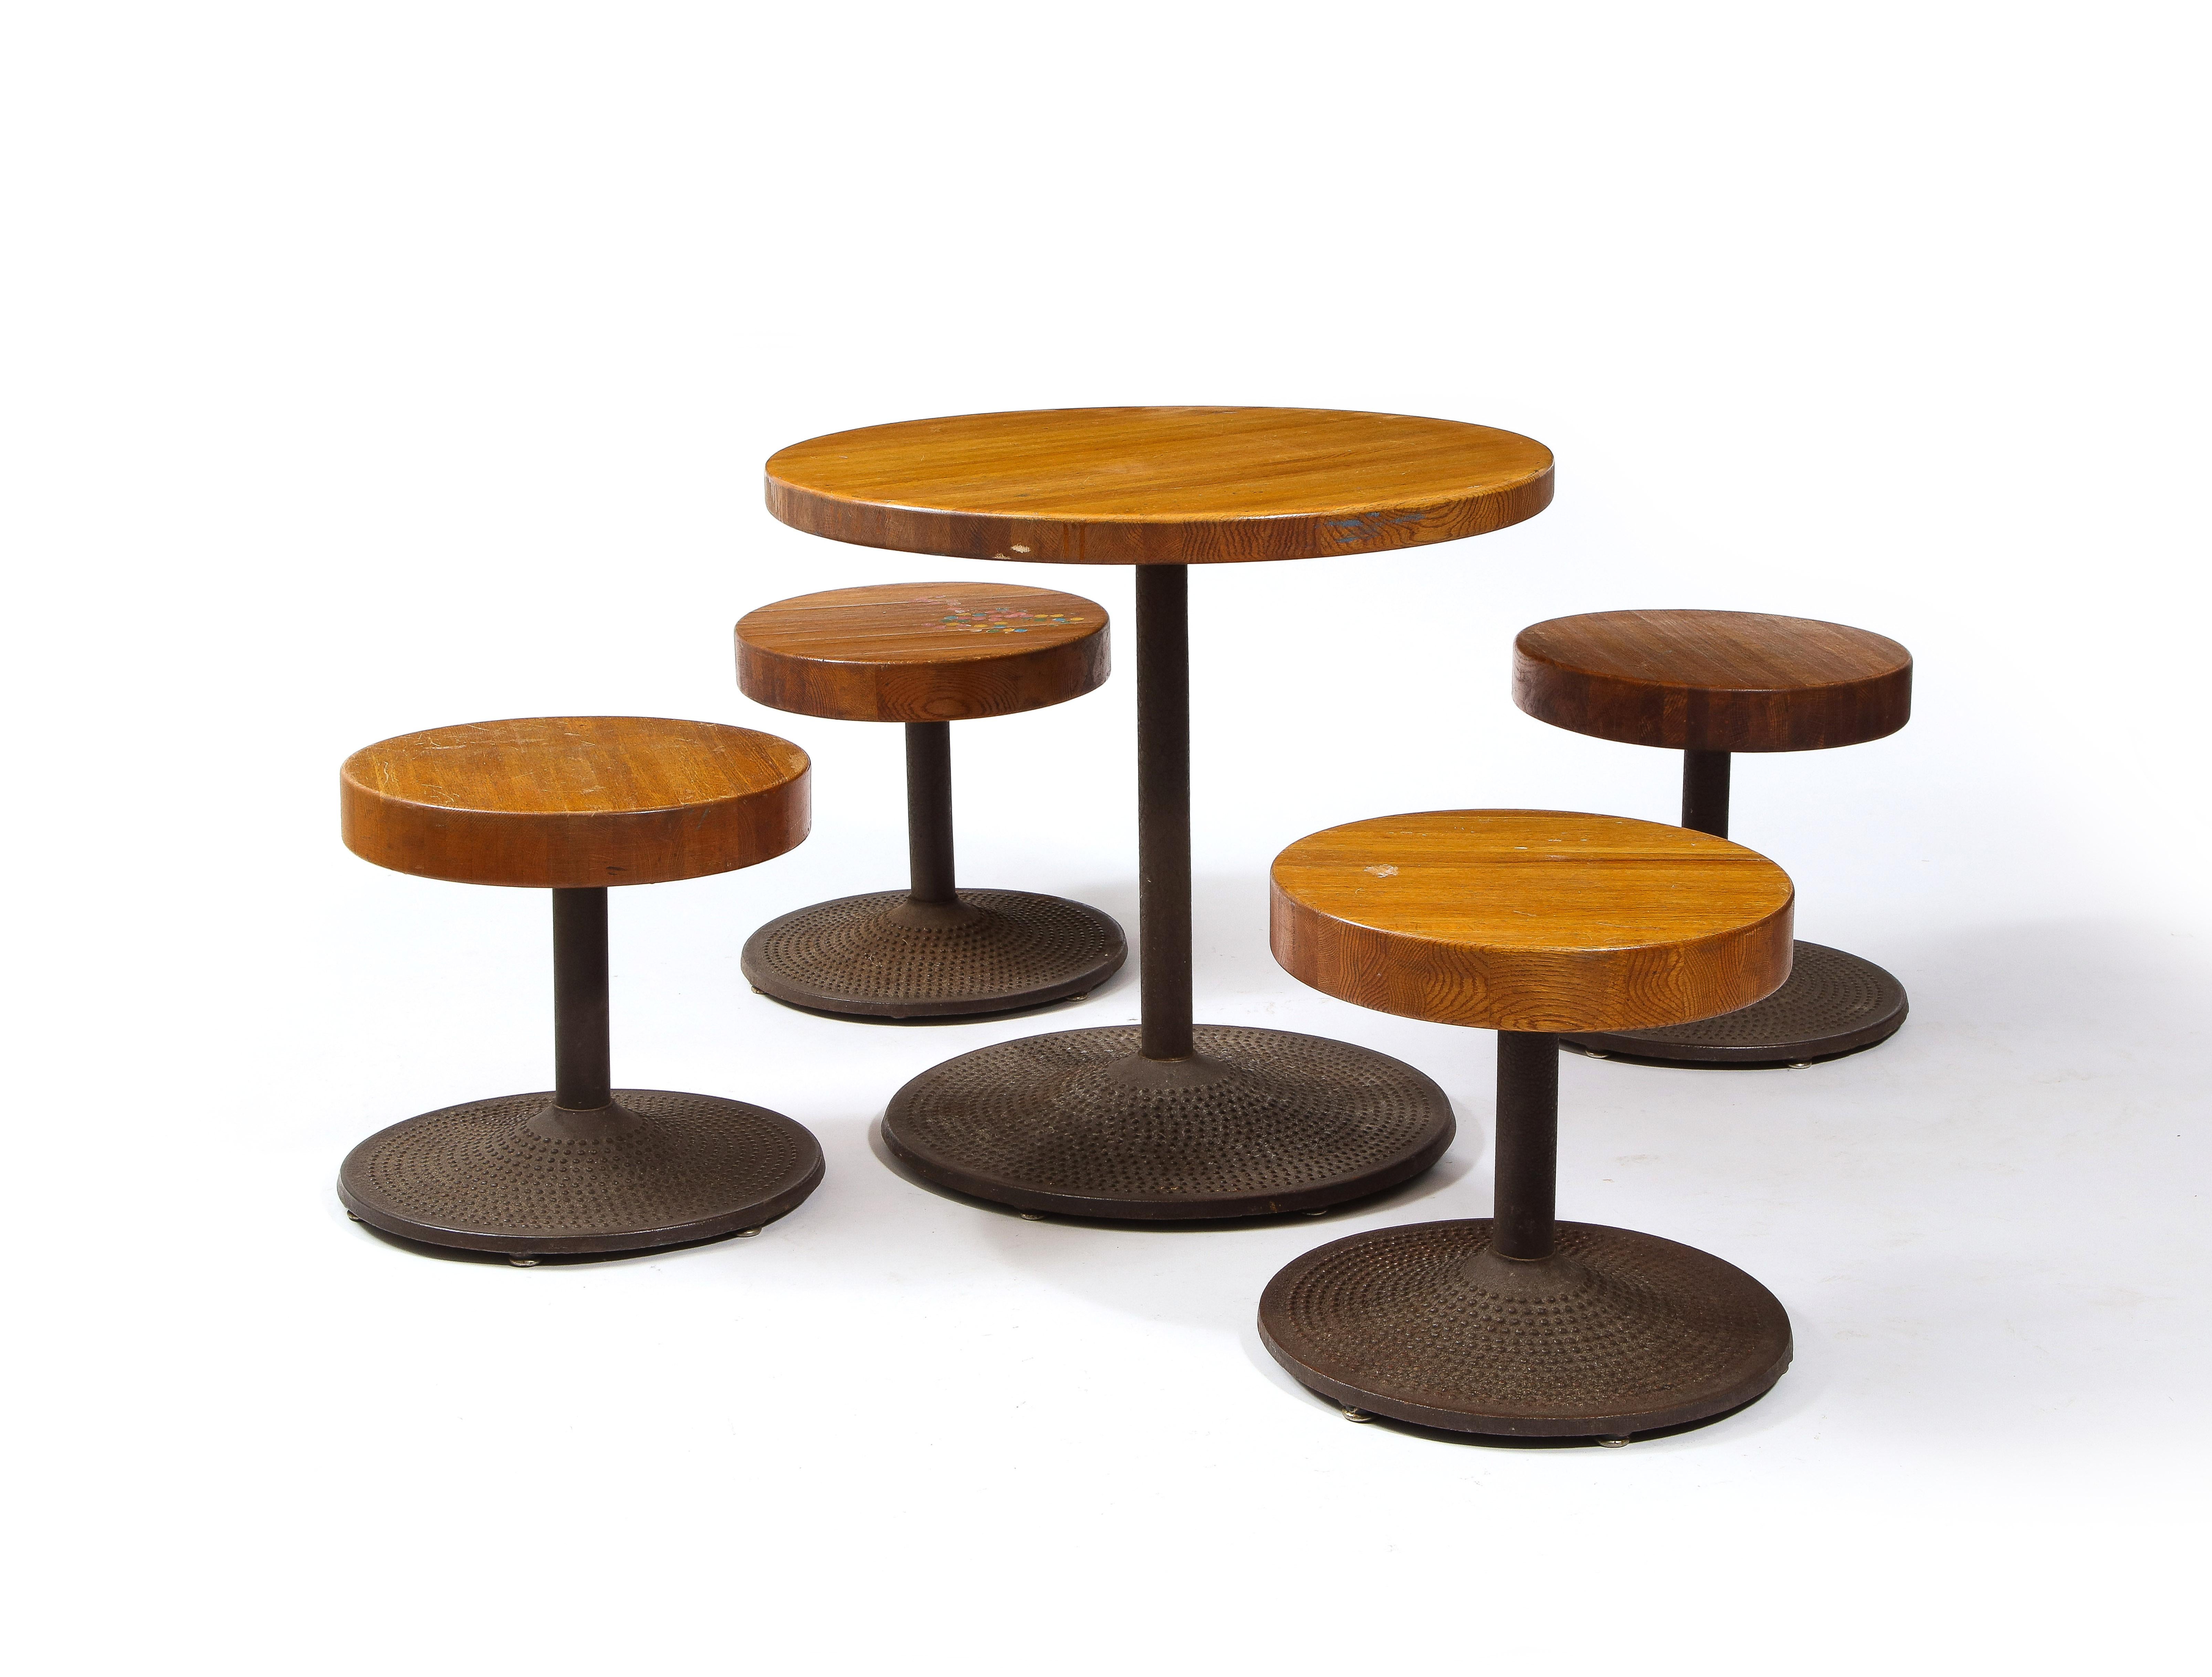 Fantastic set of cast iron and oak stool and table, the bases are solid steel with a dimple motif while the tops are solid oak, the design bears similarity to a Perriand model for Les Arcs.